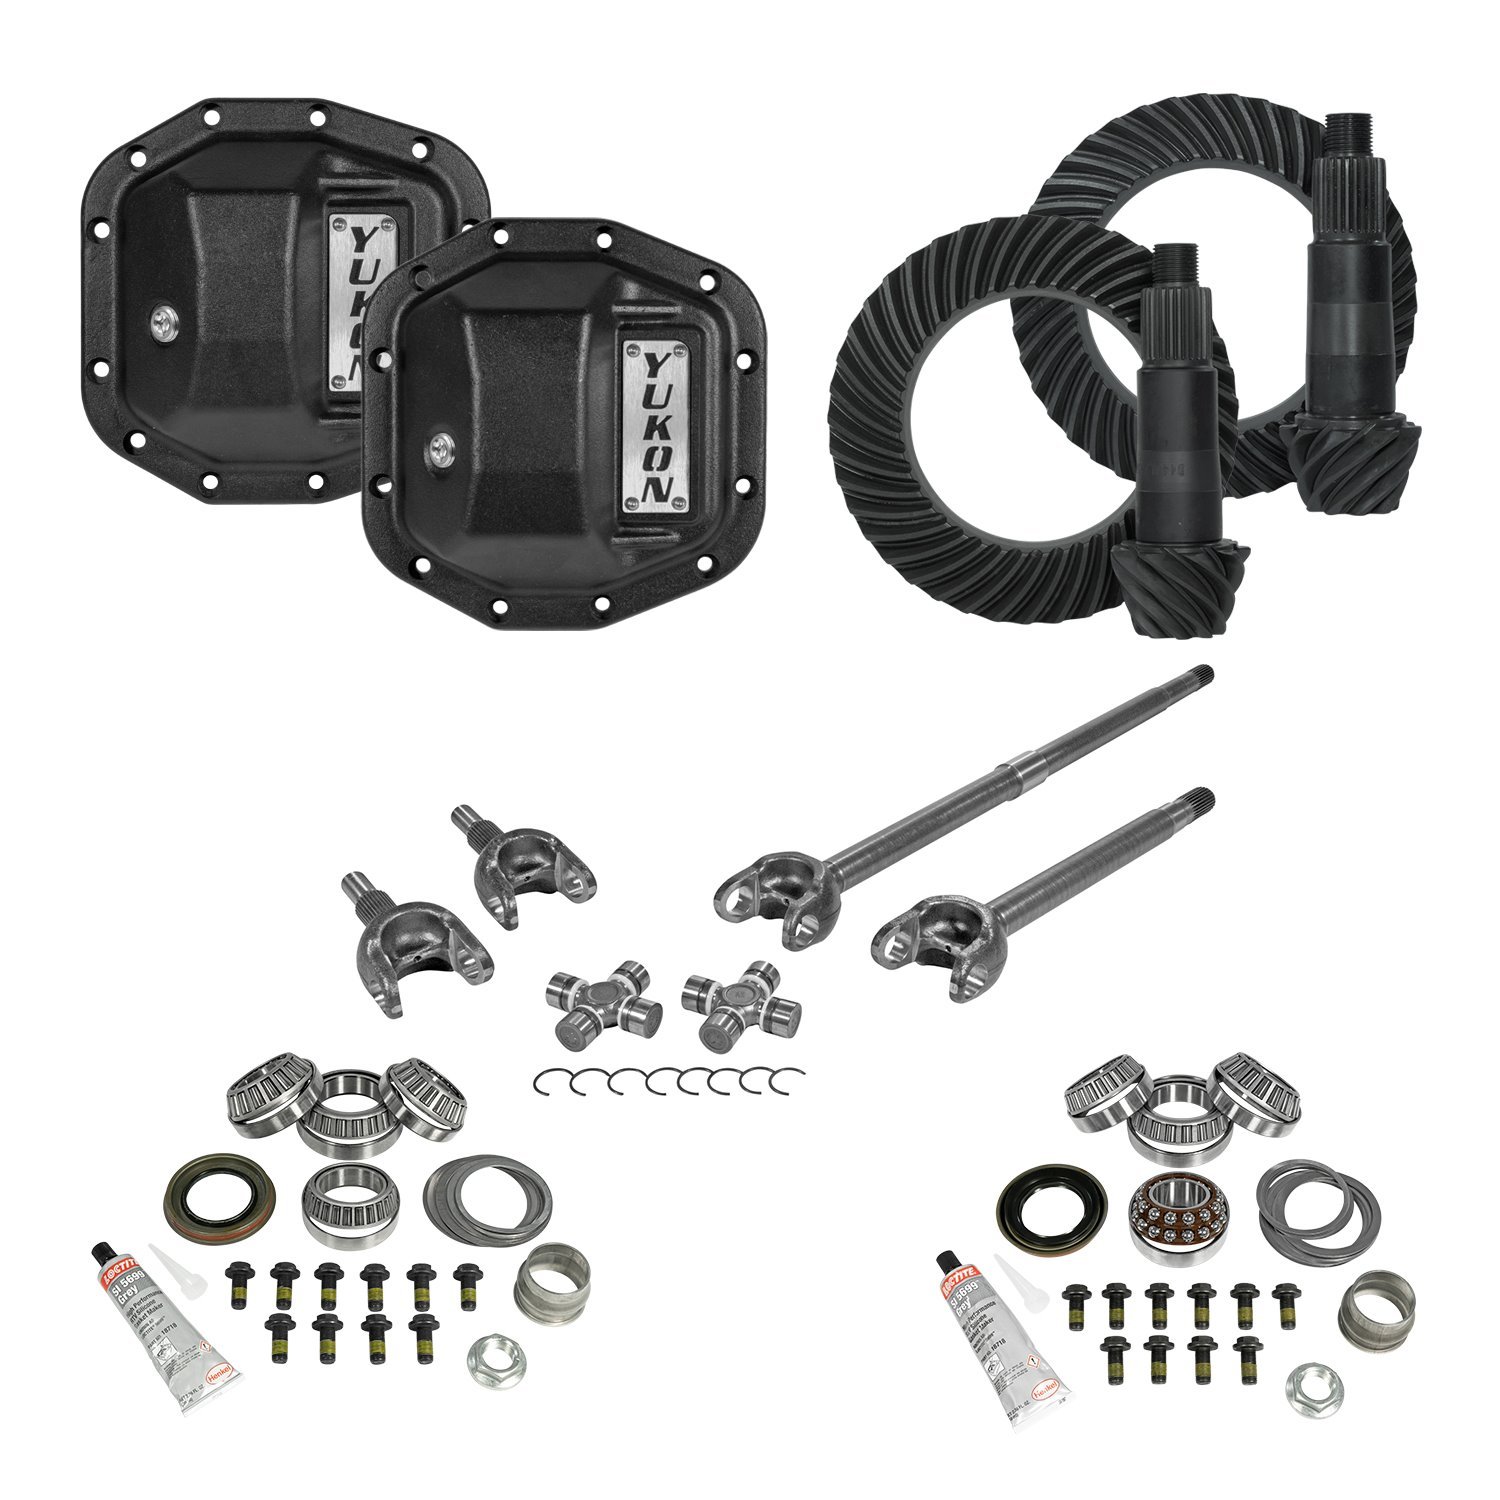 Stage 3 Jeep Jl Re-Gear Kit W/Covers, Front Axles, Dana 30/35, 4.11 Ratio